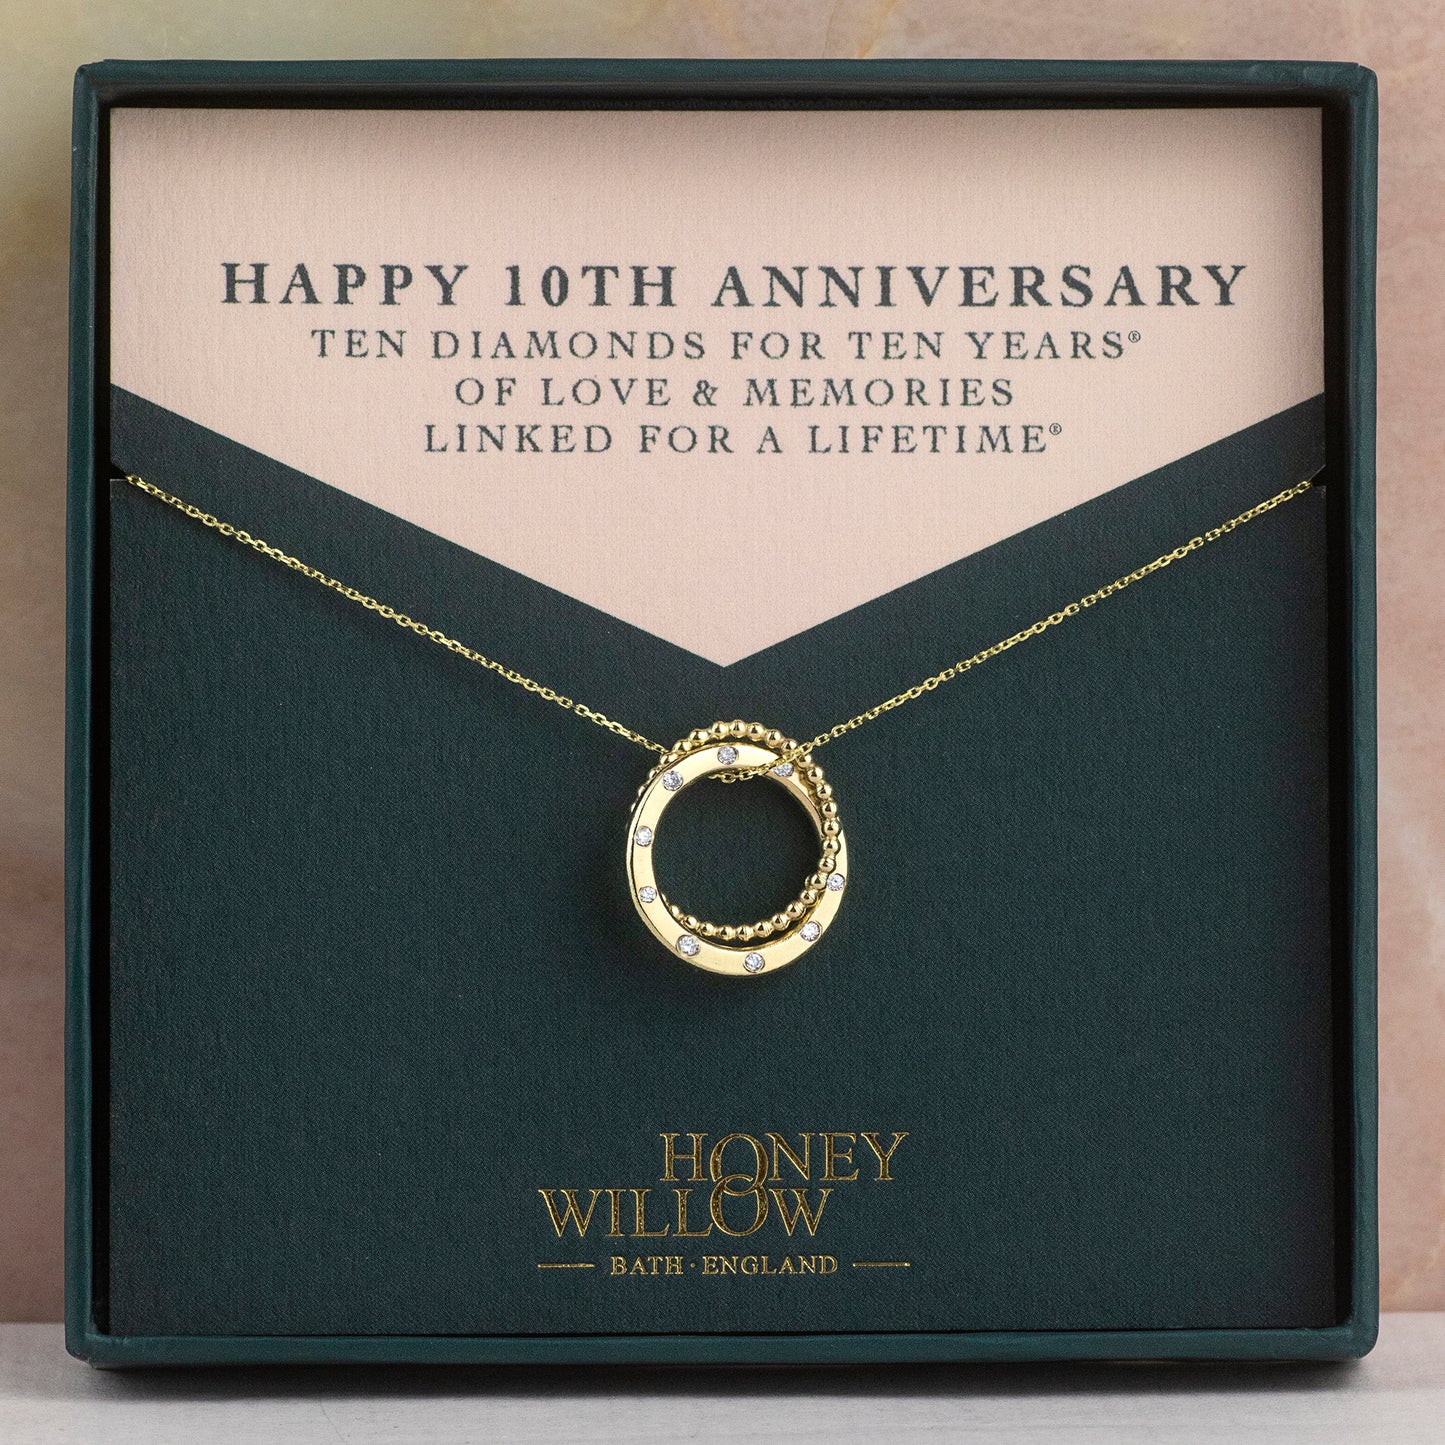 10th Anniversary Necklace - 10 Diamonds for 10 Years - 9kt Gold